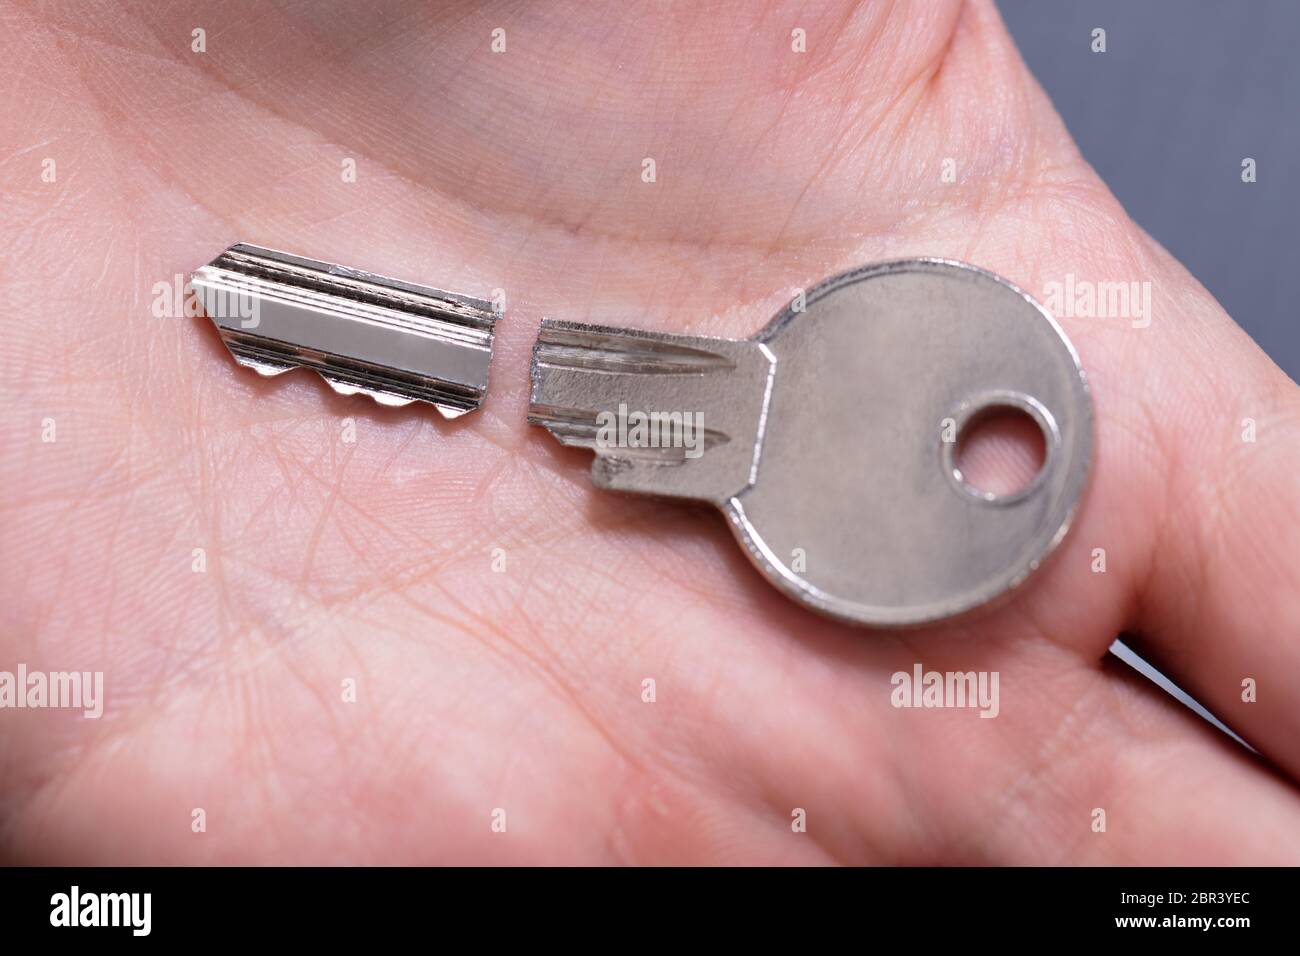 Close-up Of Person's Hand Holding Silver Broken Key Stock Photo